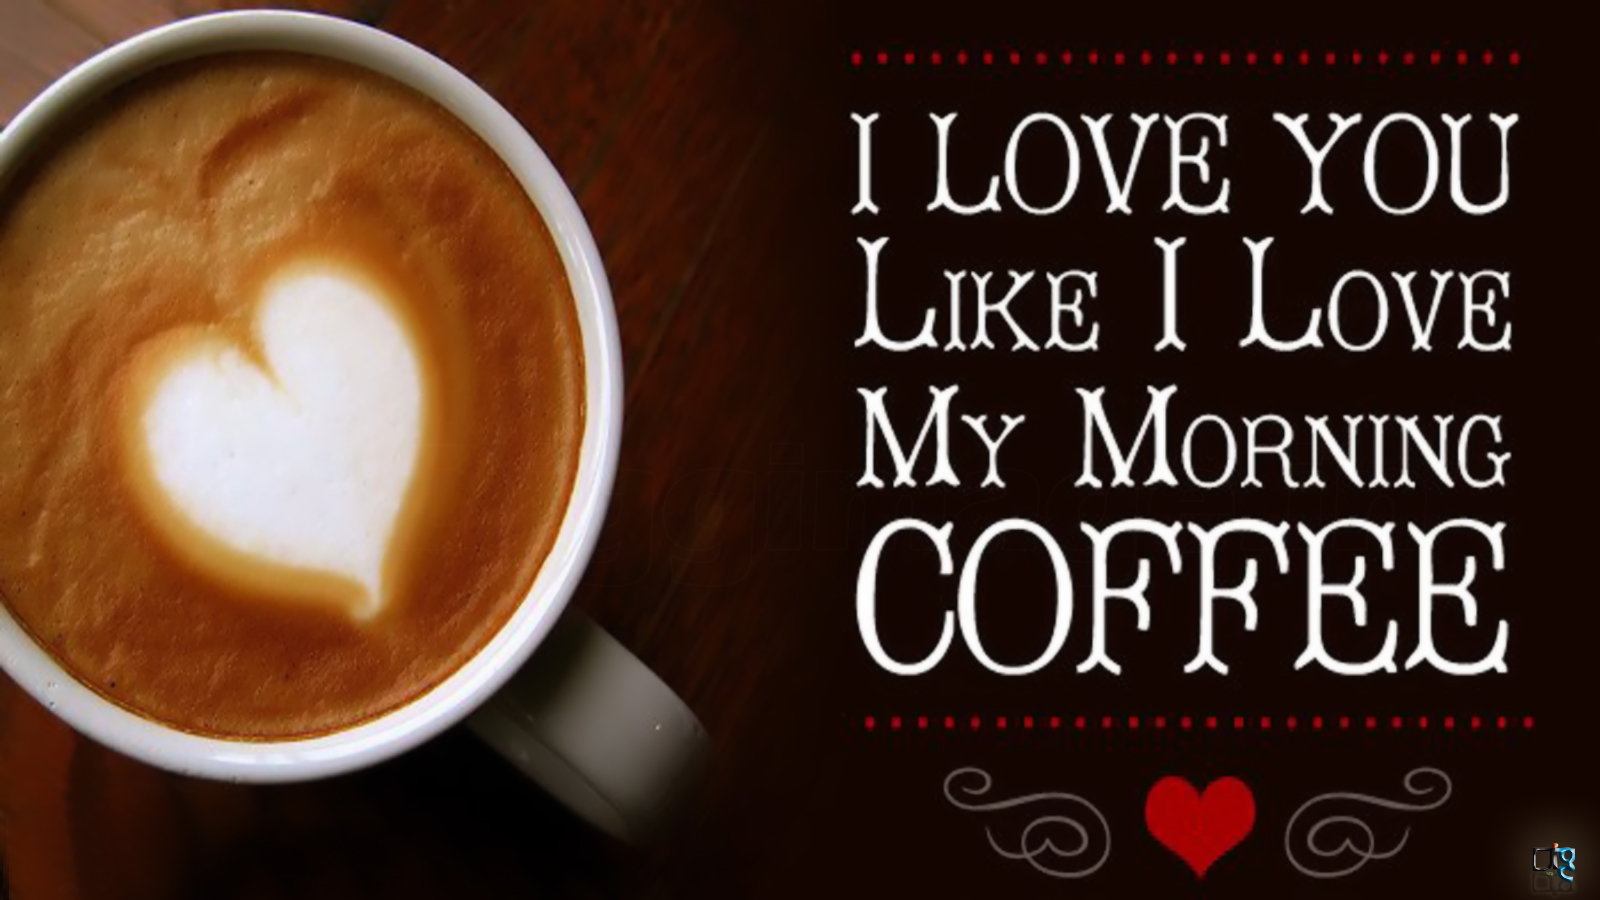 Good Morning My Morning coffee i love you like you … with quotes free